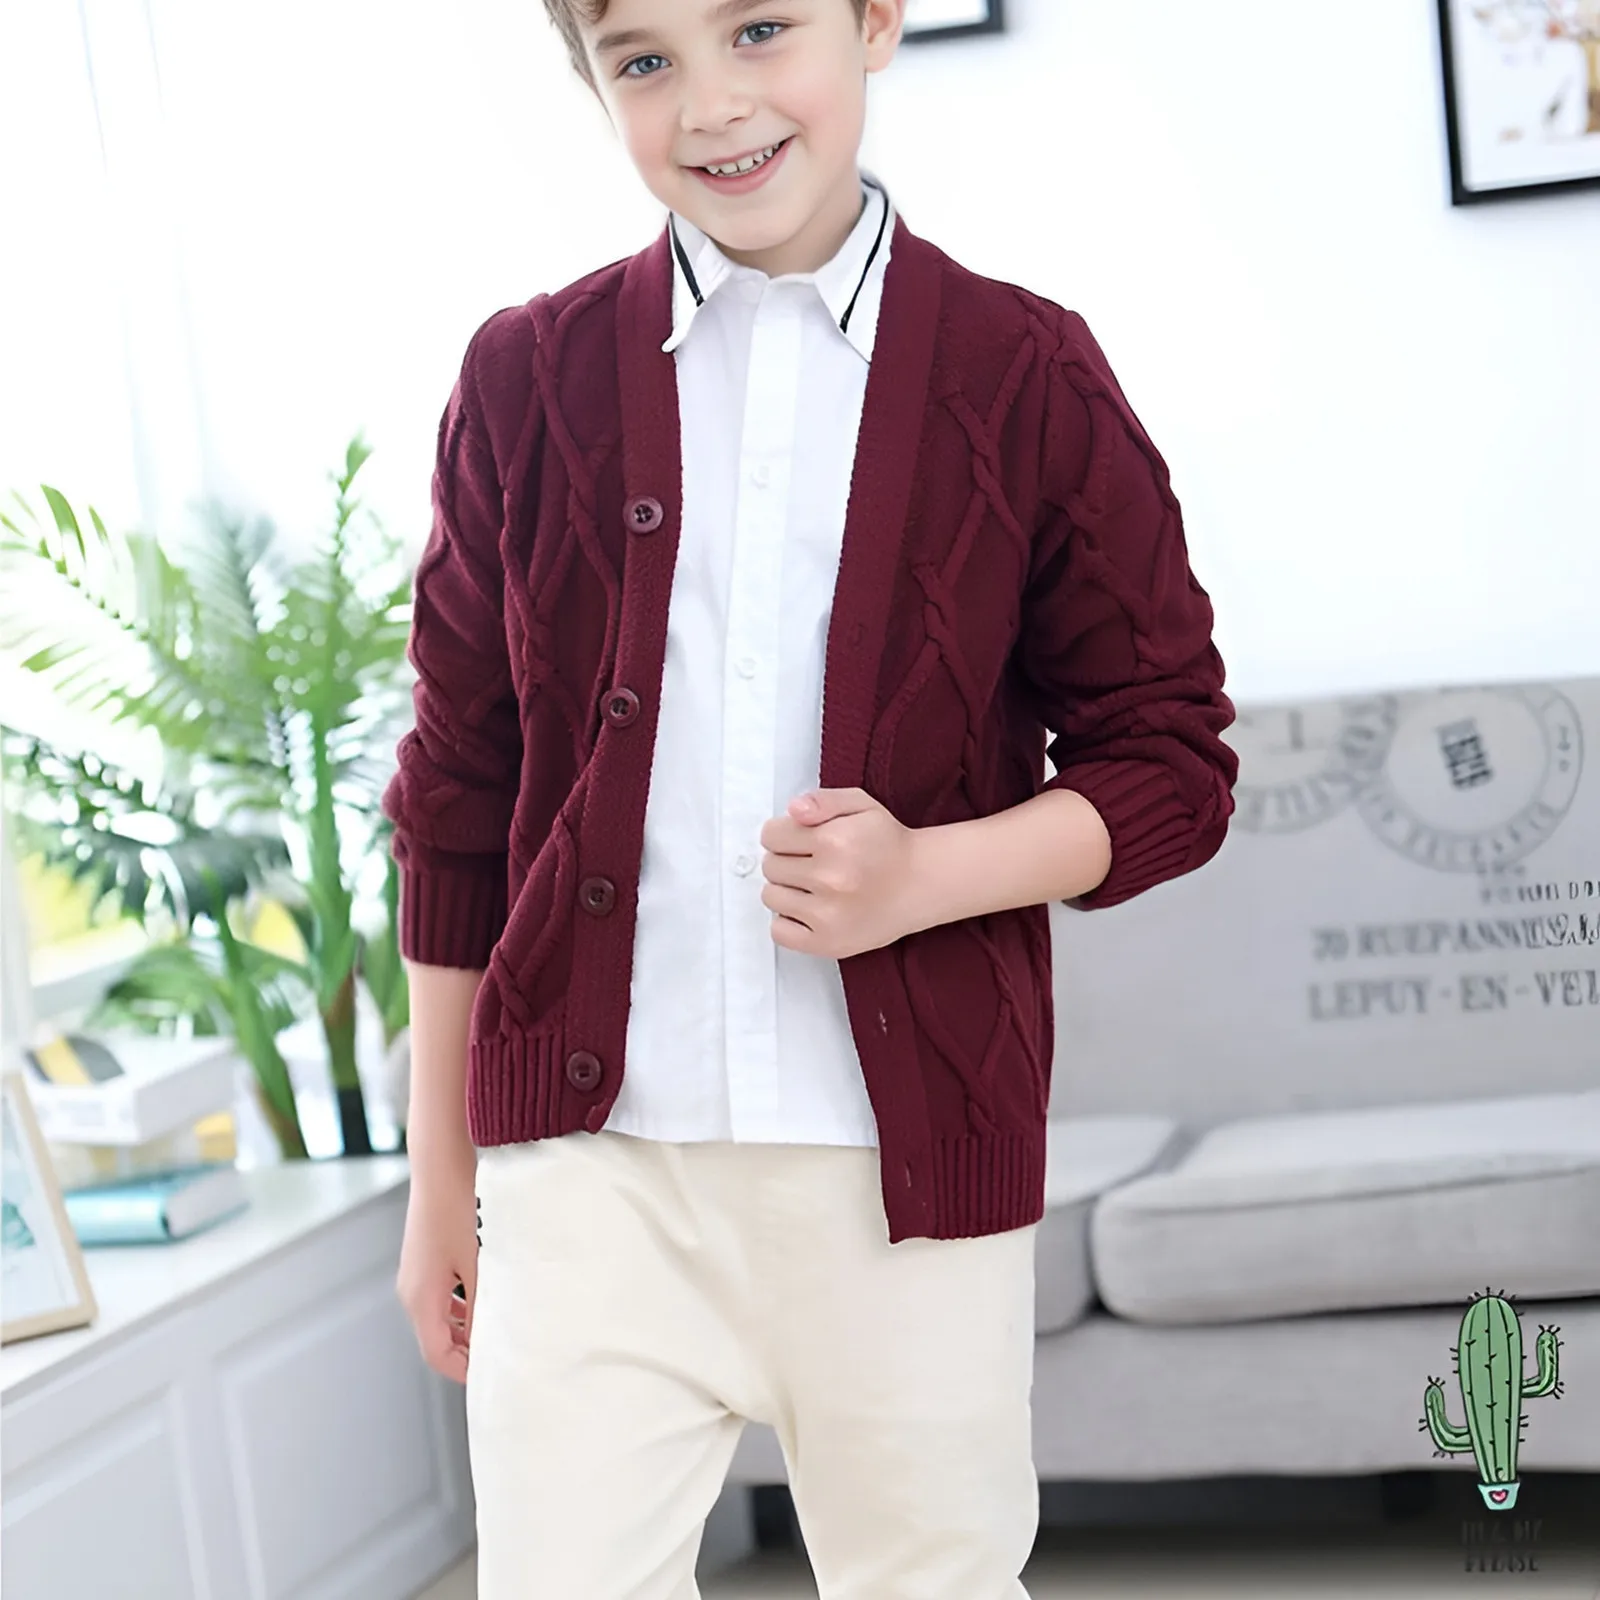 

Hot Sales Spring Autumn Boys Sweater Solid Color Keep Warm Knitting Jacquard Weave V-Neck Cardigan For 2-10 Years Old Kids 2025